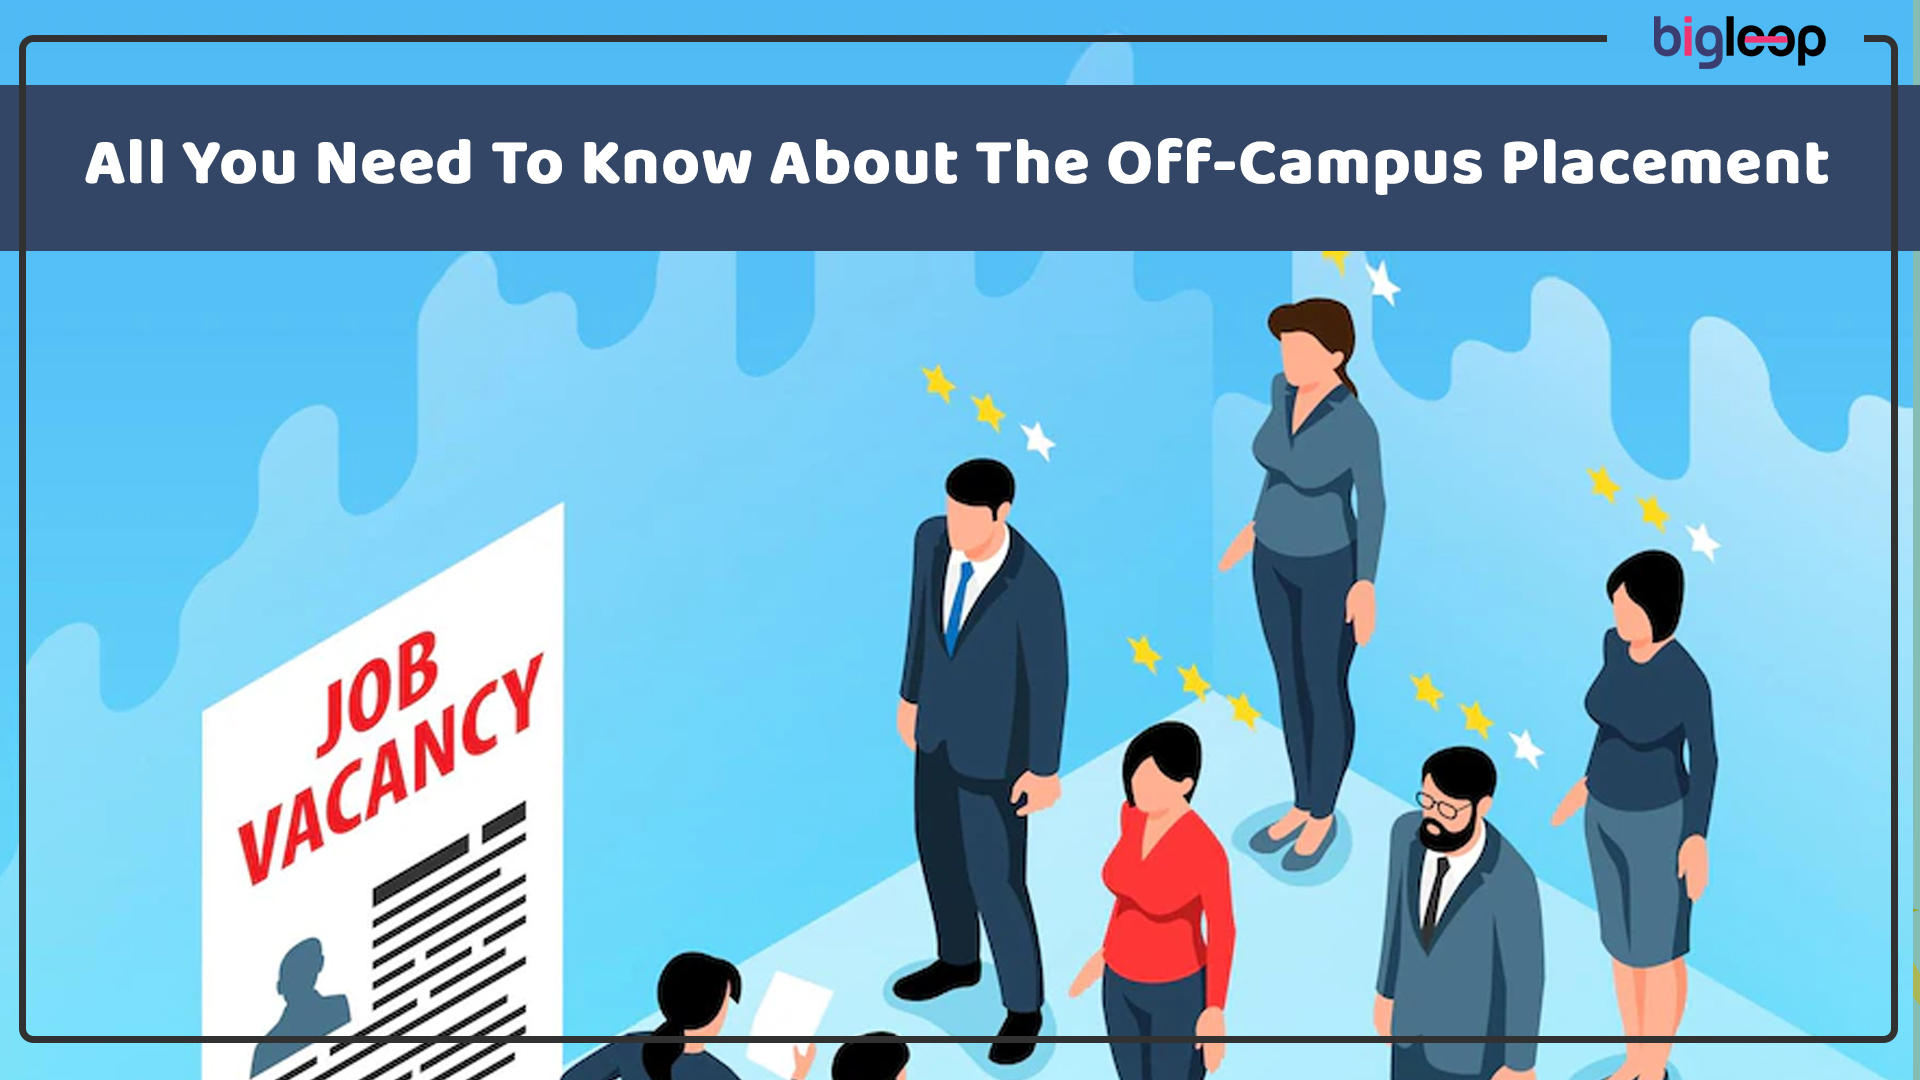 All You Need To Know About The Off-Campus Placement